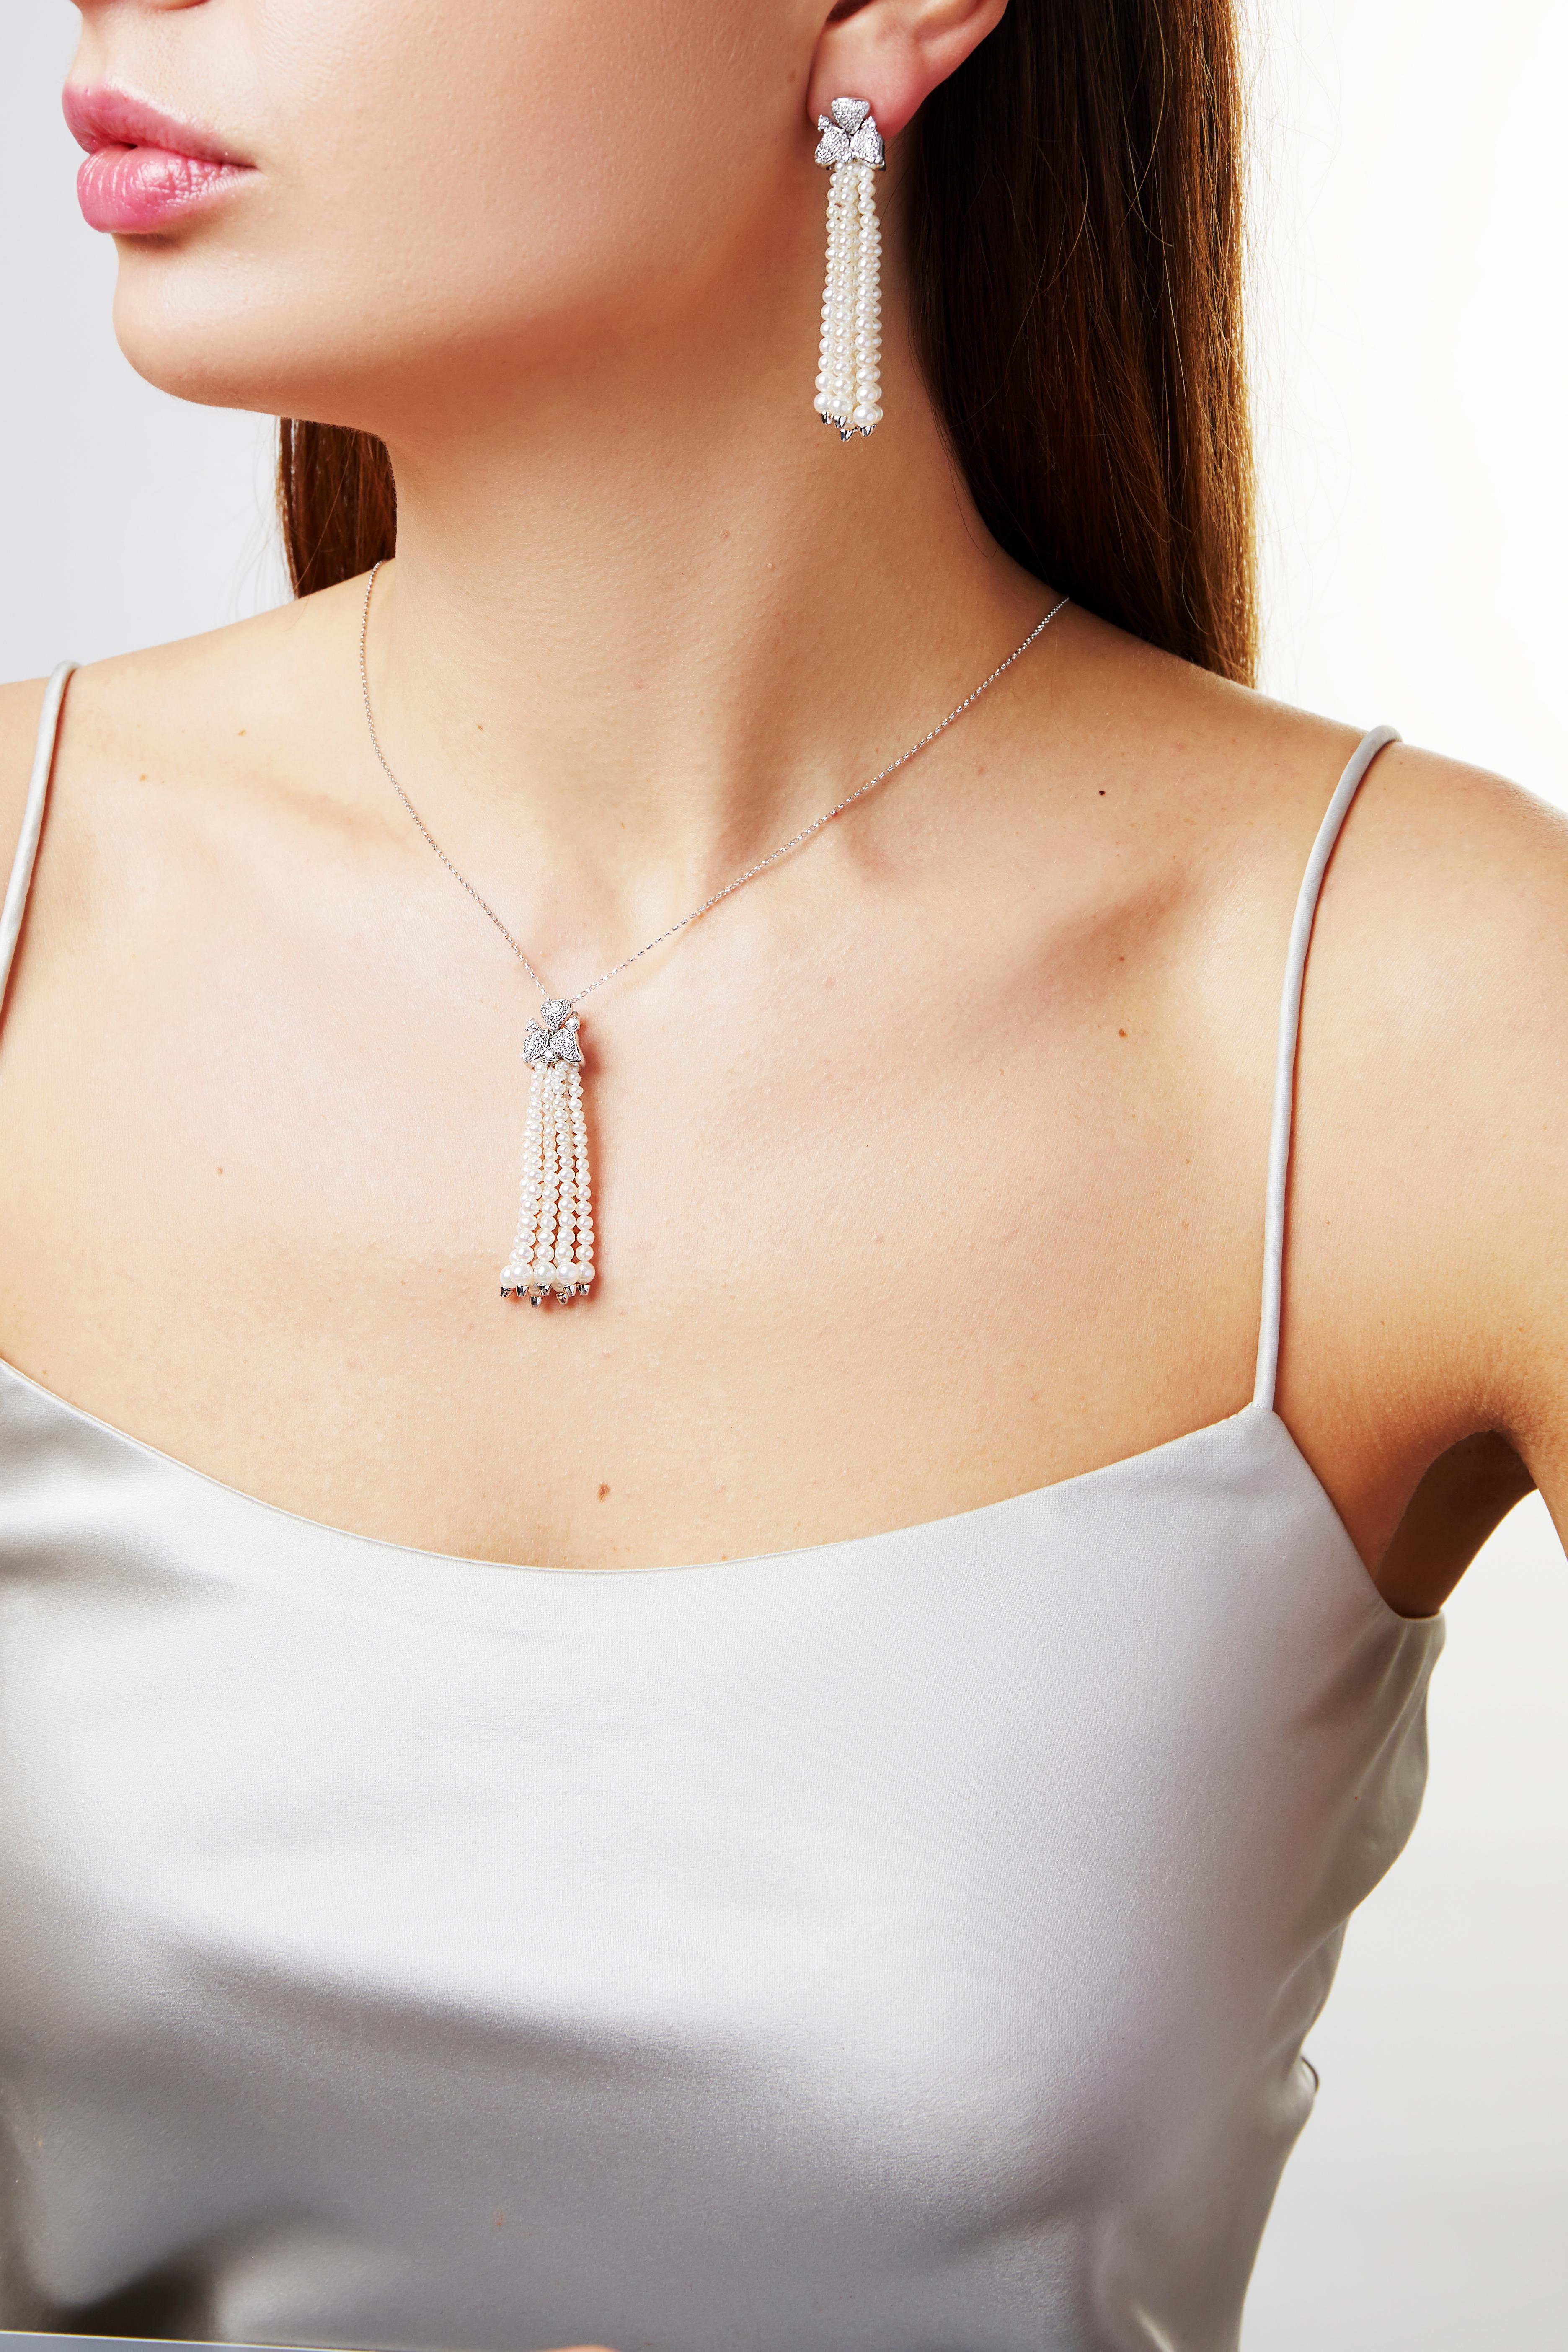 This elegant pendant by Yoko London features a fluid Freshwater pearl tassel, beneath intricate diamond flowers. Set in 18 Karat white gold, this unique pendant will make quite the statement each and everytime it is worn, especially when paired